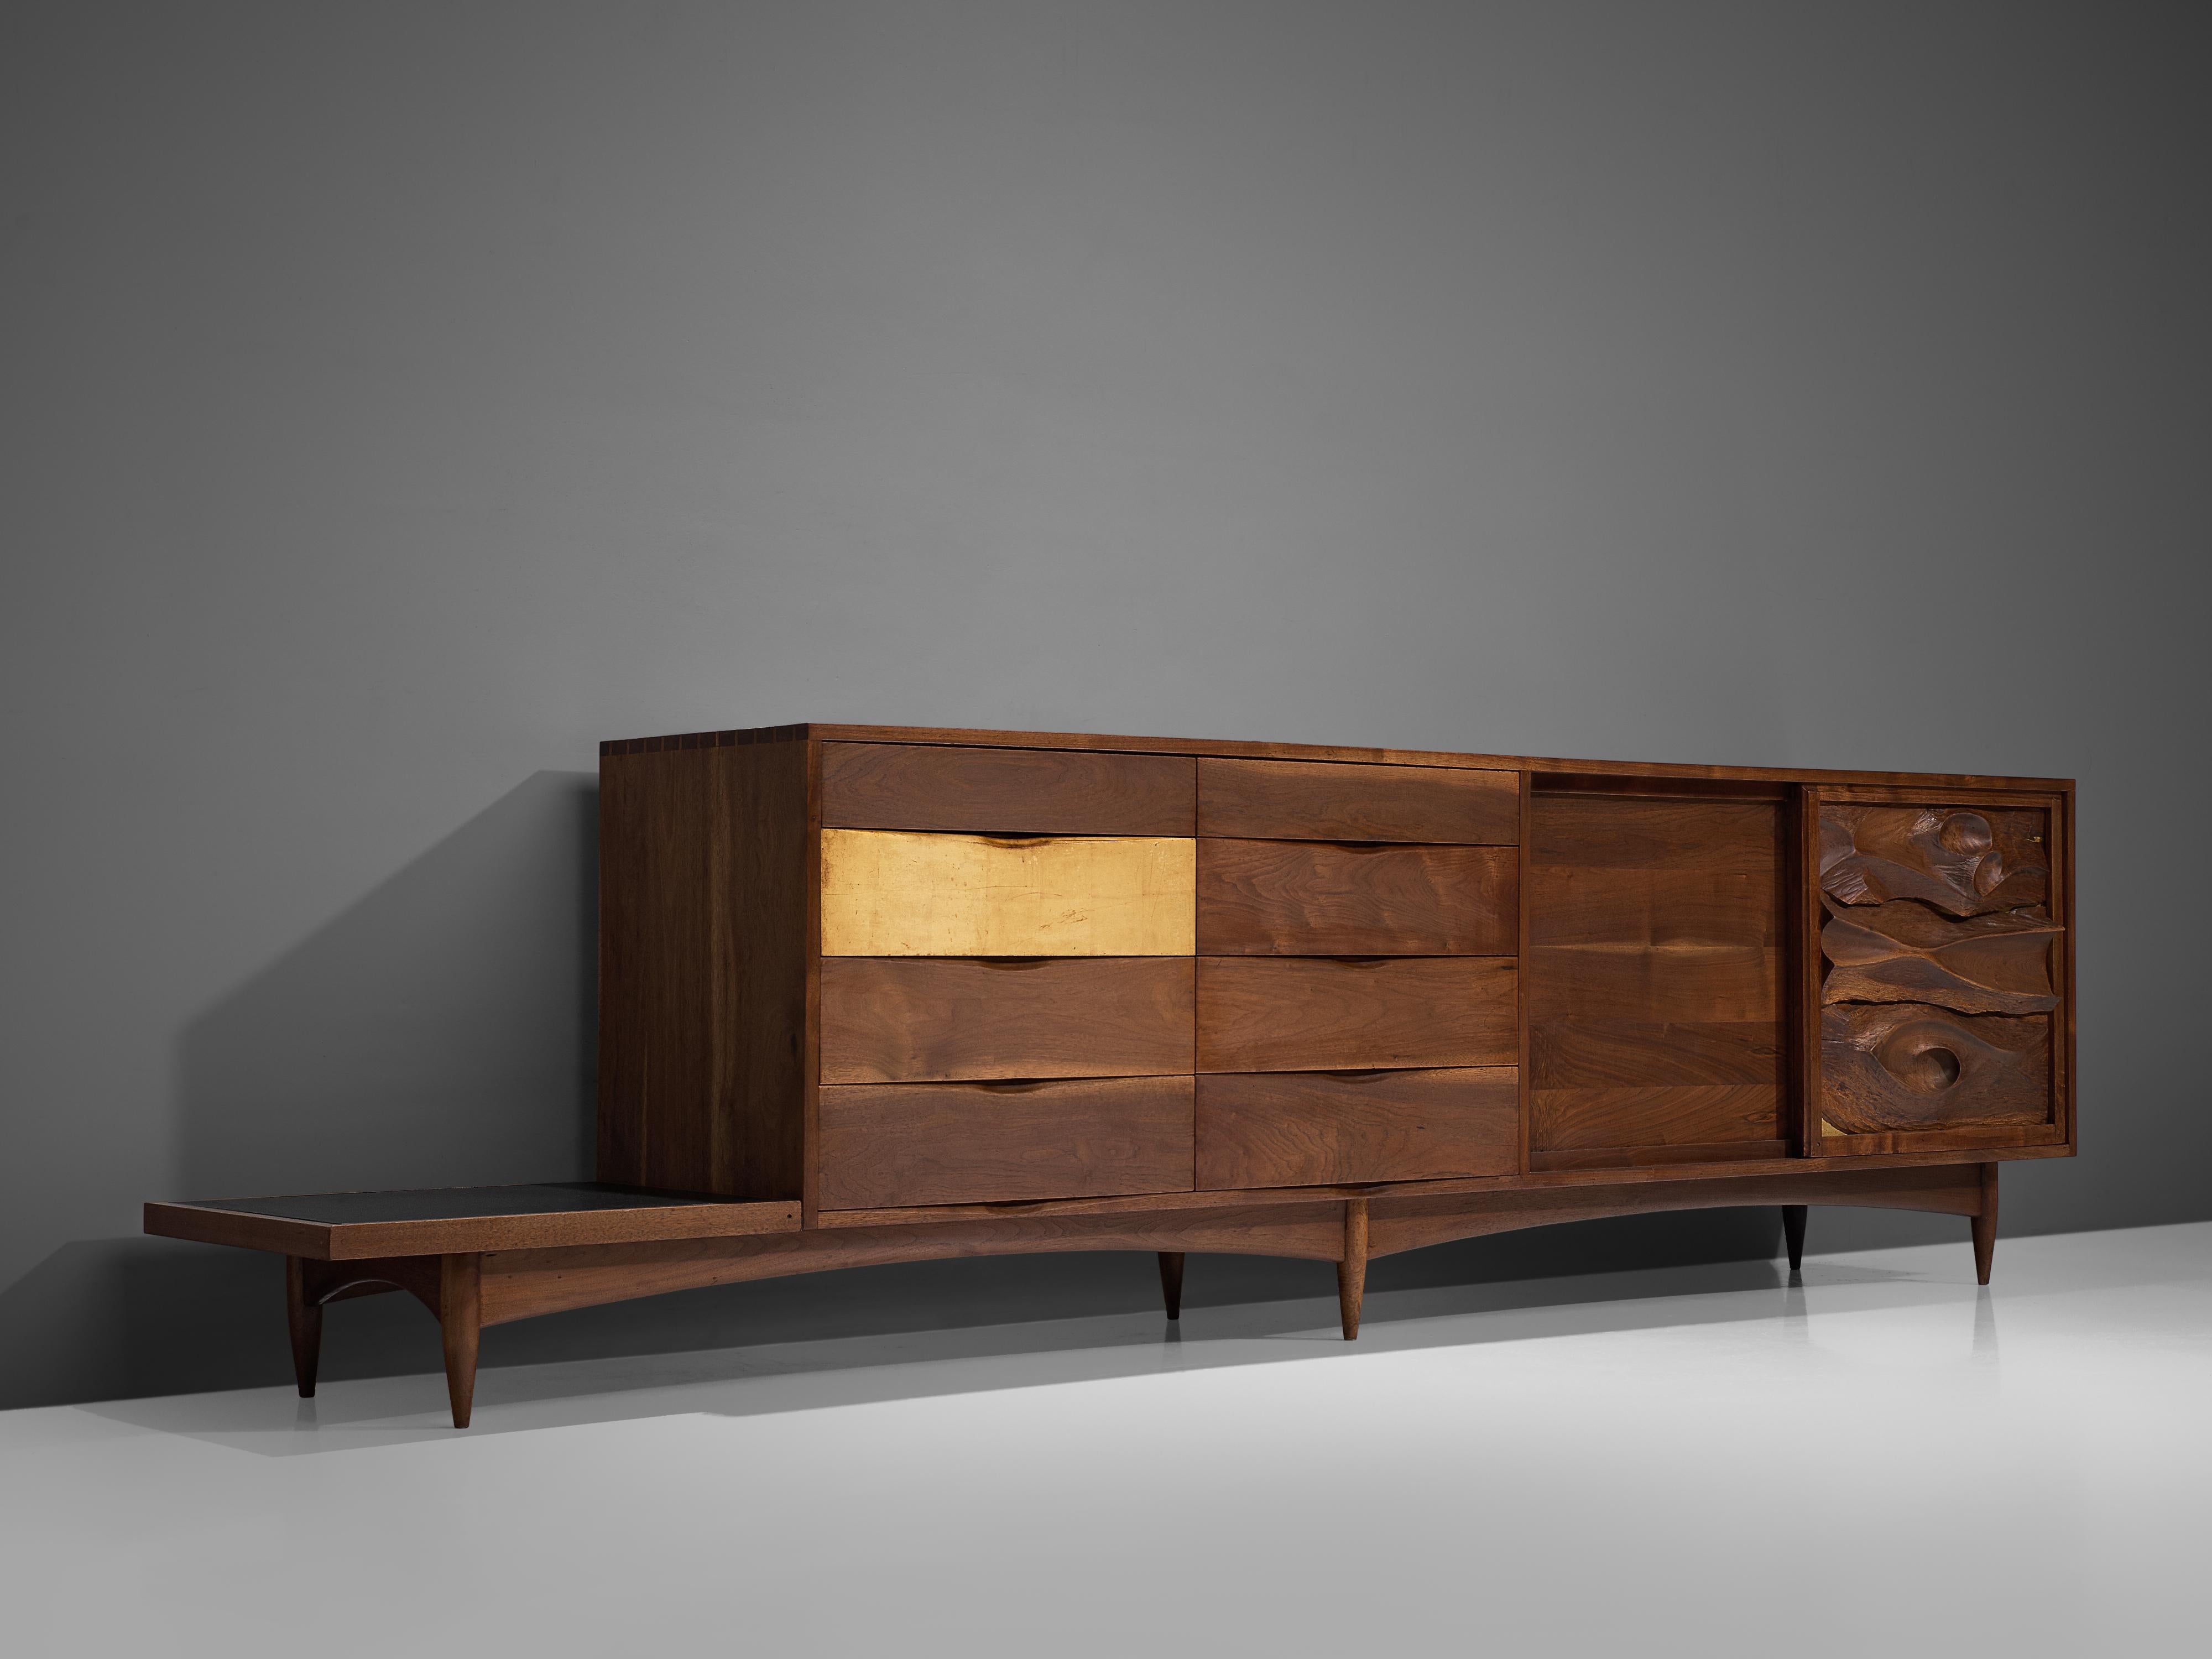 Phillip Lloyd Powell, sideboard, American black walnut, gold leaf, slate, New Hope, United States, early 1960s

This exquisite large sideboard is designed by Phillip Lloyd Powell and executed in solid black walnut. The cabinet consists of four